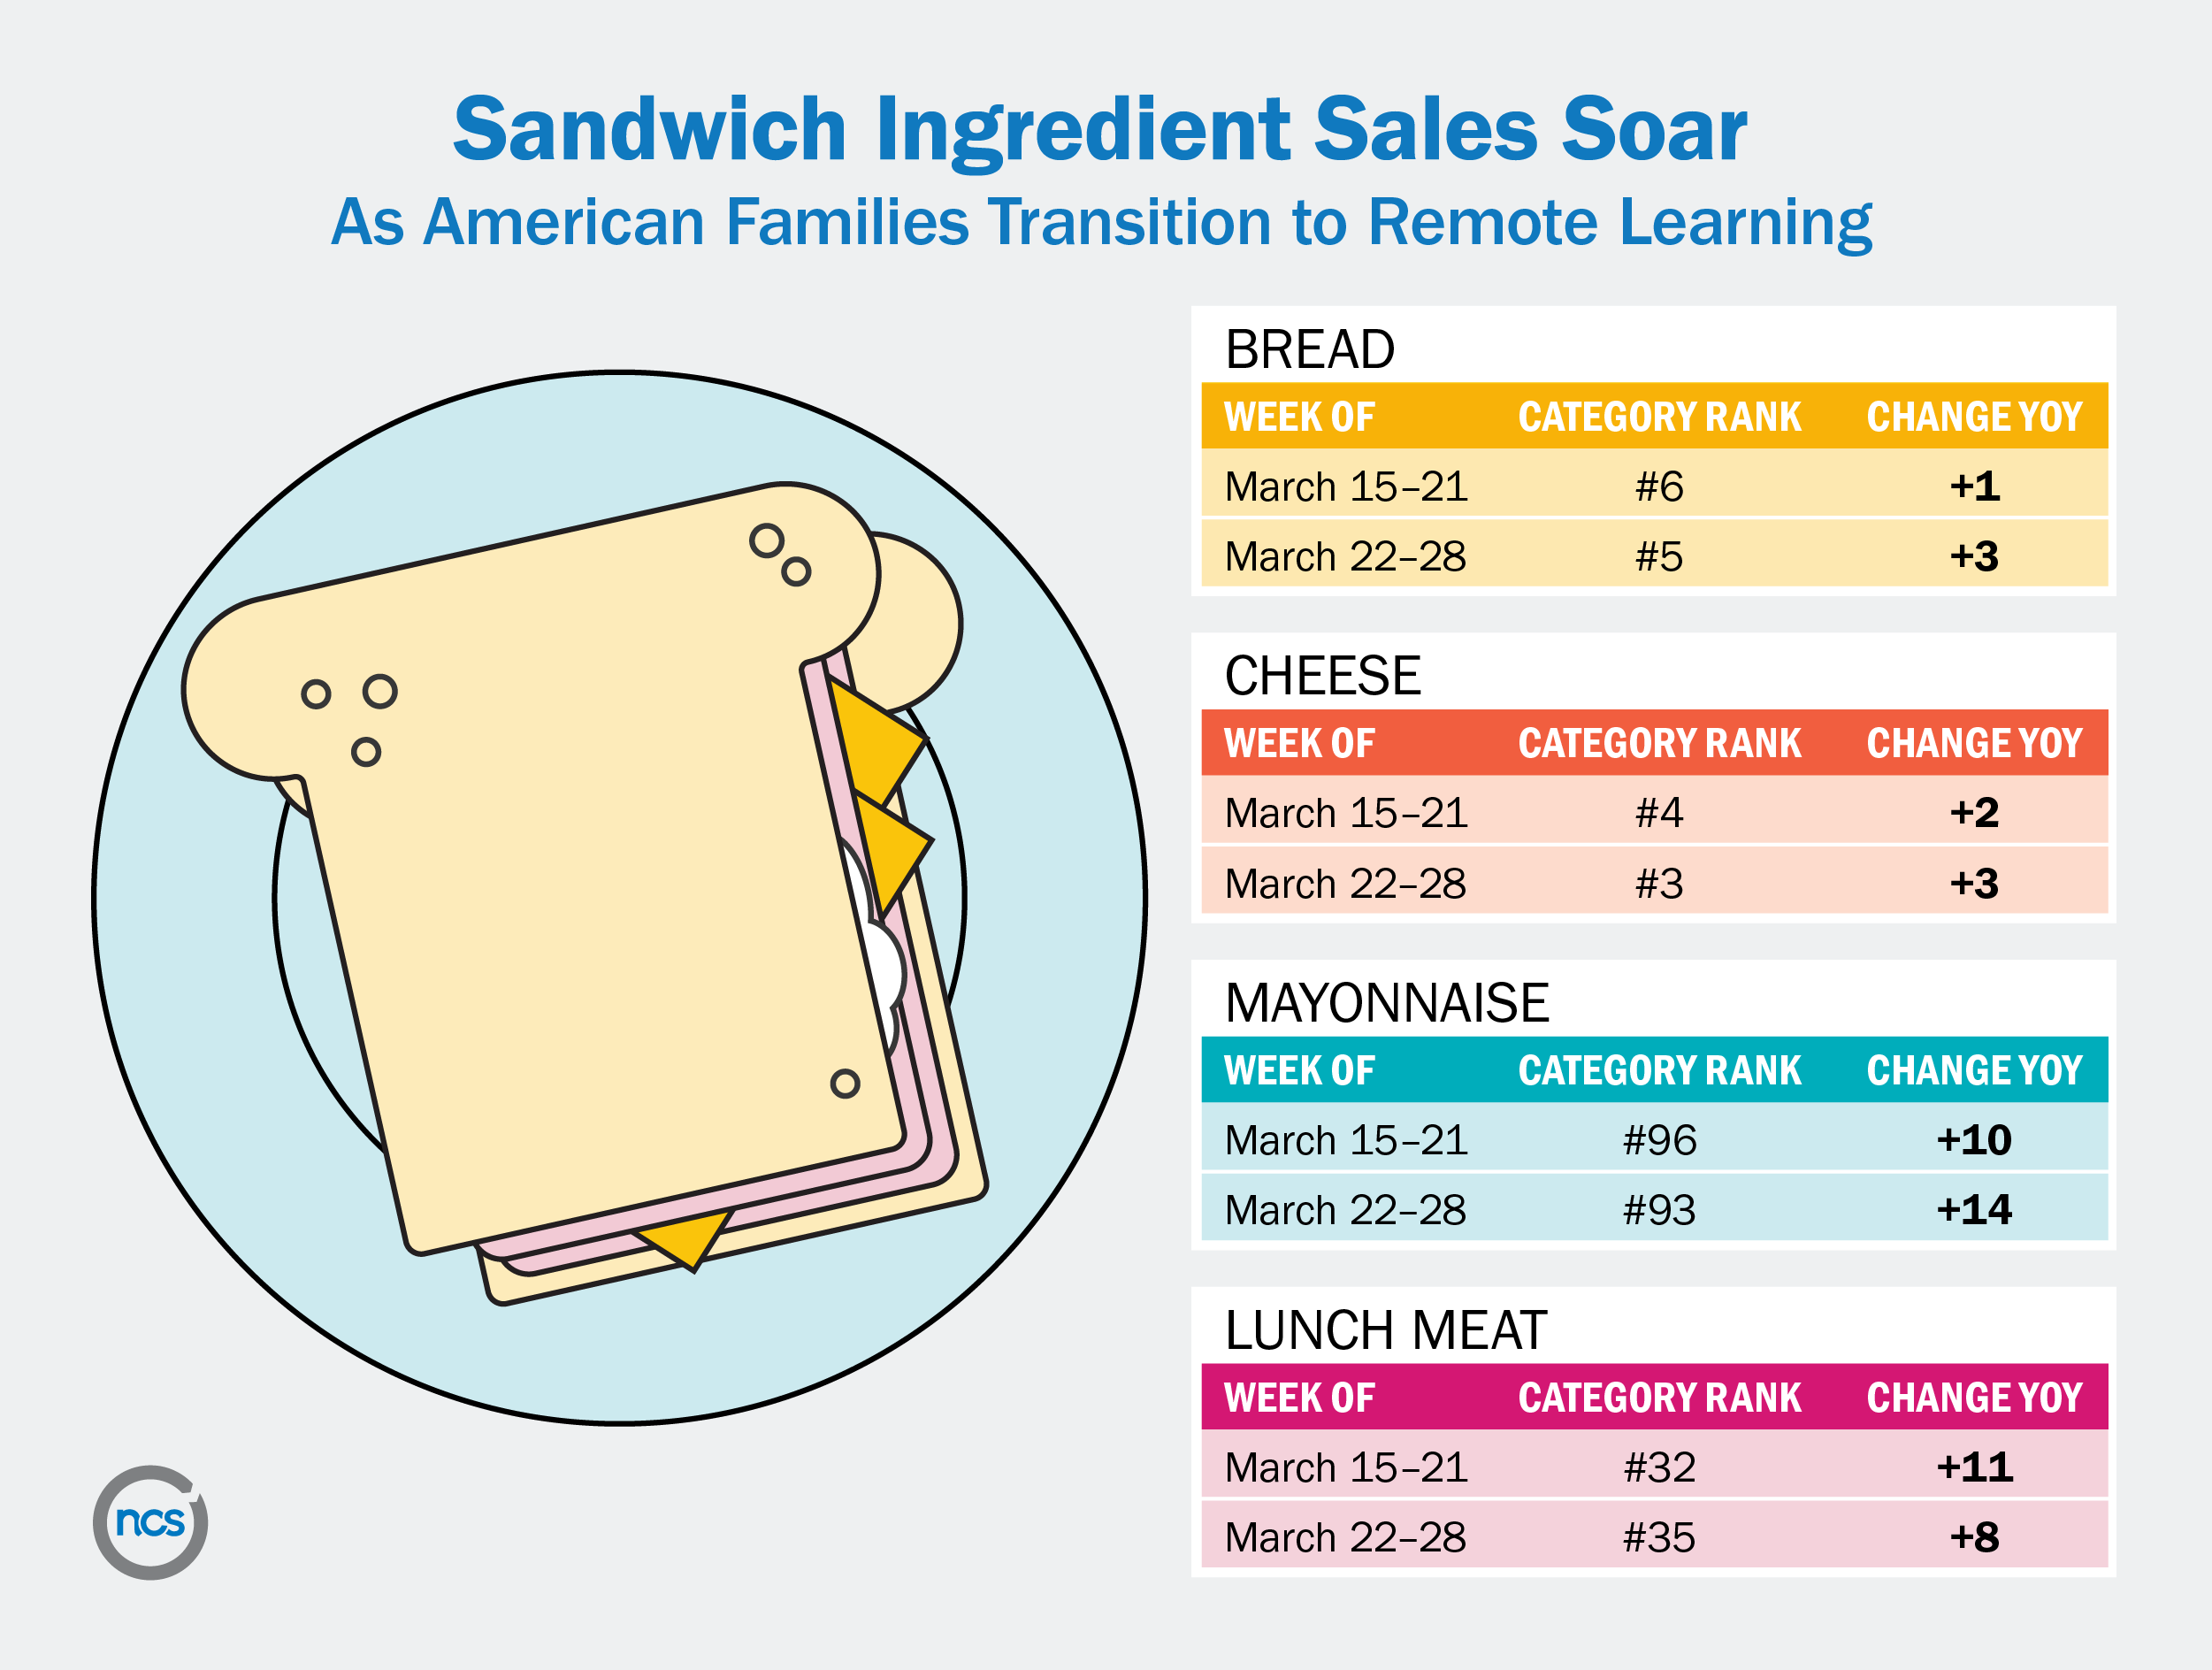 Sandwich ingredients sales rise from March 15-28 2020 as American families transition to remote work and school.